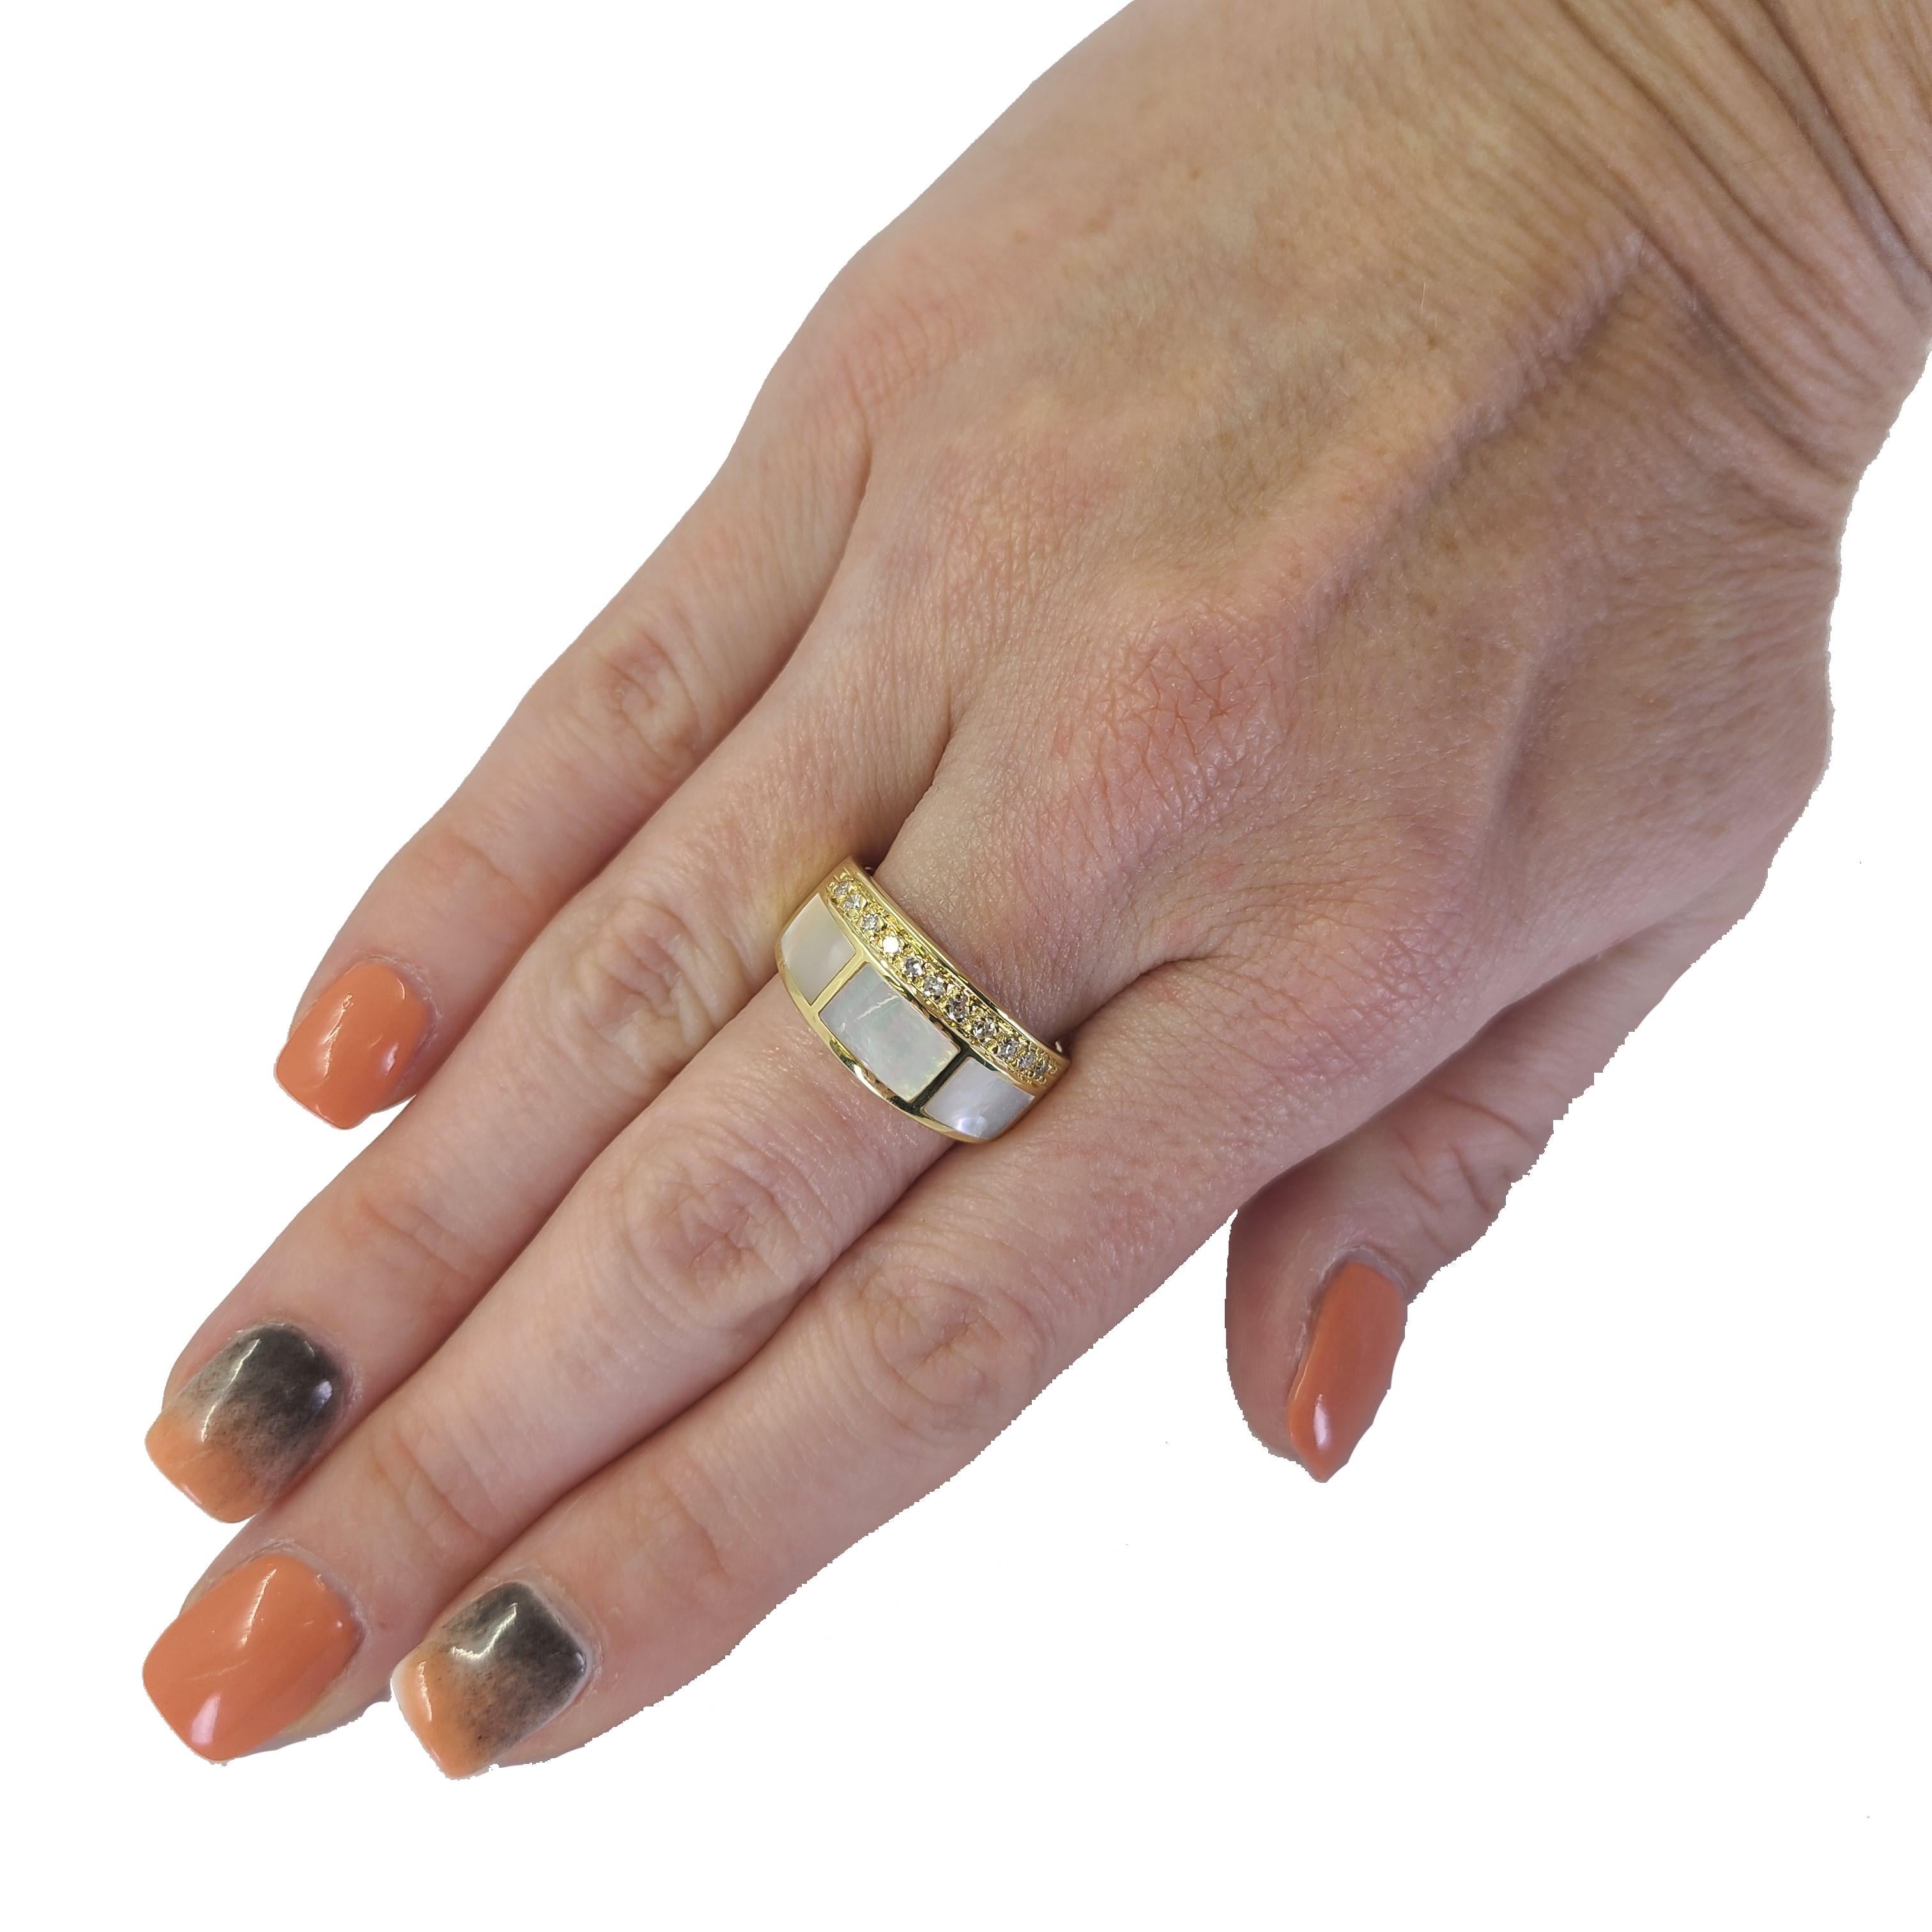 18 Karat Yellow Gold Ring Featuring 3 Rectangular Mother-of-Pearl Inlays & 11 Single Cut Diamonds Of VS Clarity & G/H Color. Finger Size 7.5. Made In Italy. Finished Weight Is 6.8 Grams.